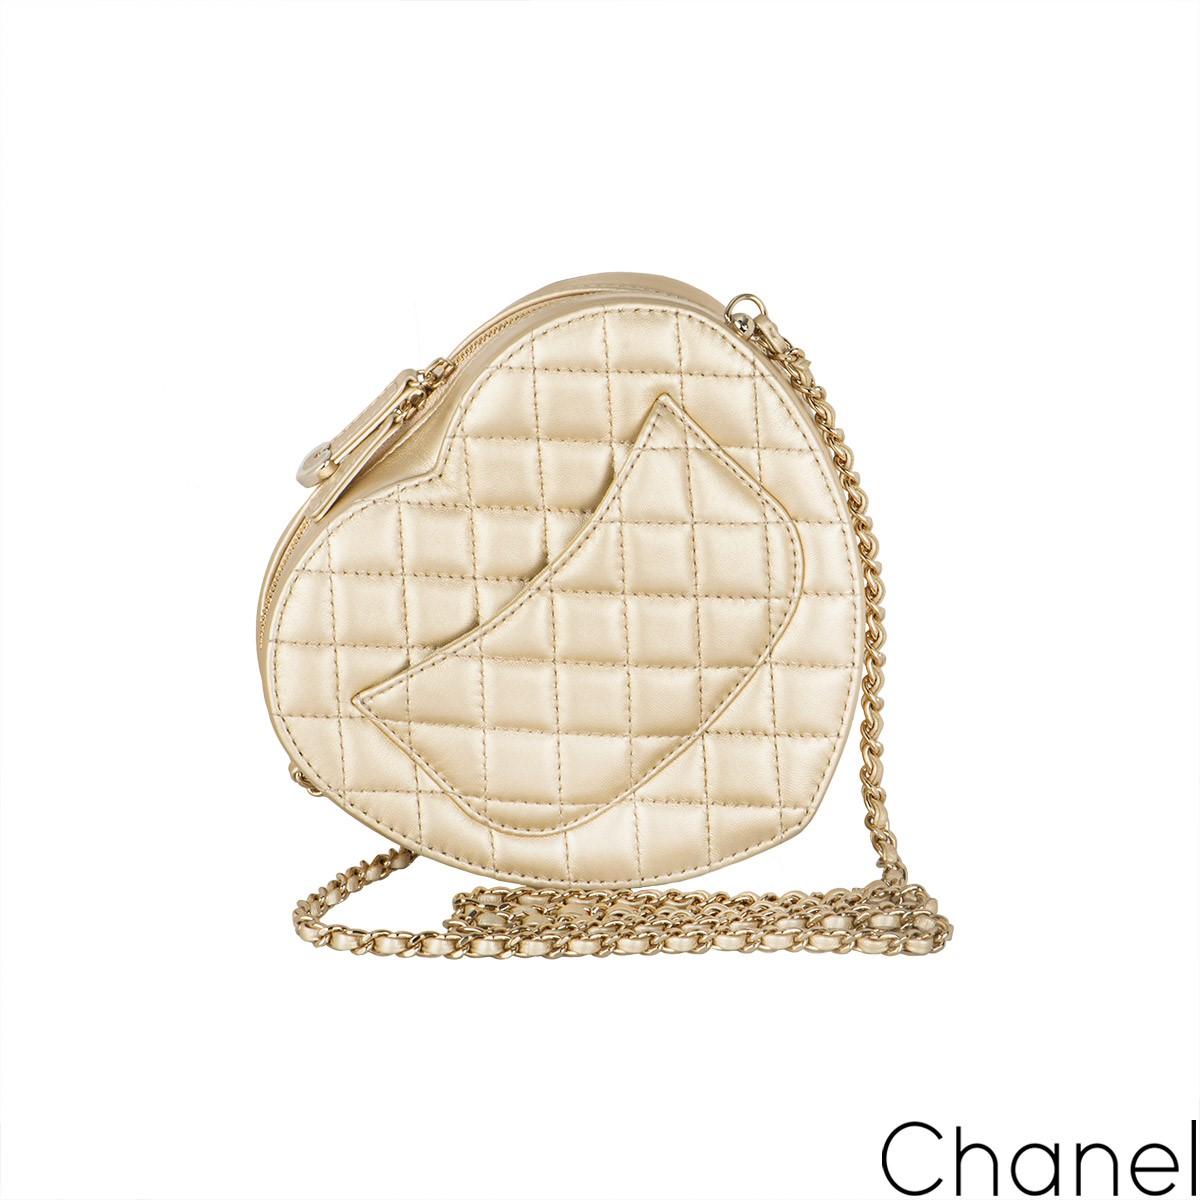 A coveted gold Chanel Heart Bag. The exterior of this Heart Bag is crafted with gold lambskin leather in the signature diamond style stitching with light gold-tone hardware and has a signature logo zipper pull. It features a front flap with